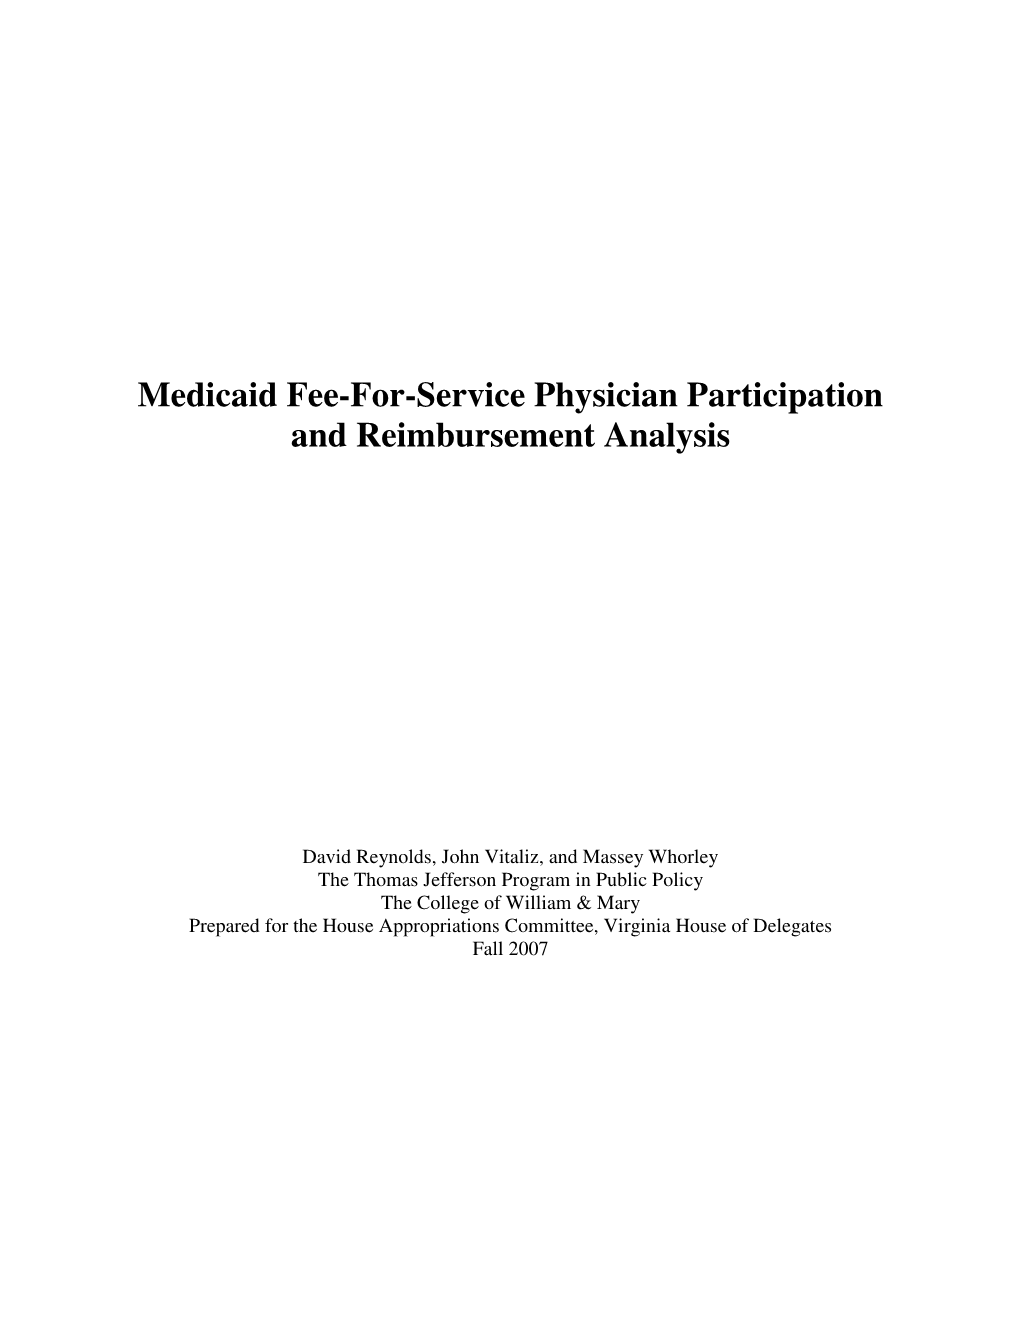 Medicaid Fee-For-Service Physician Participation and Reimbursement Analysis